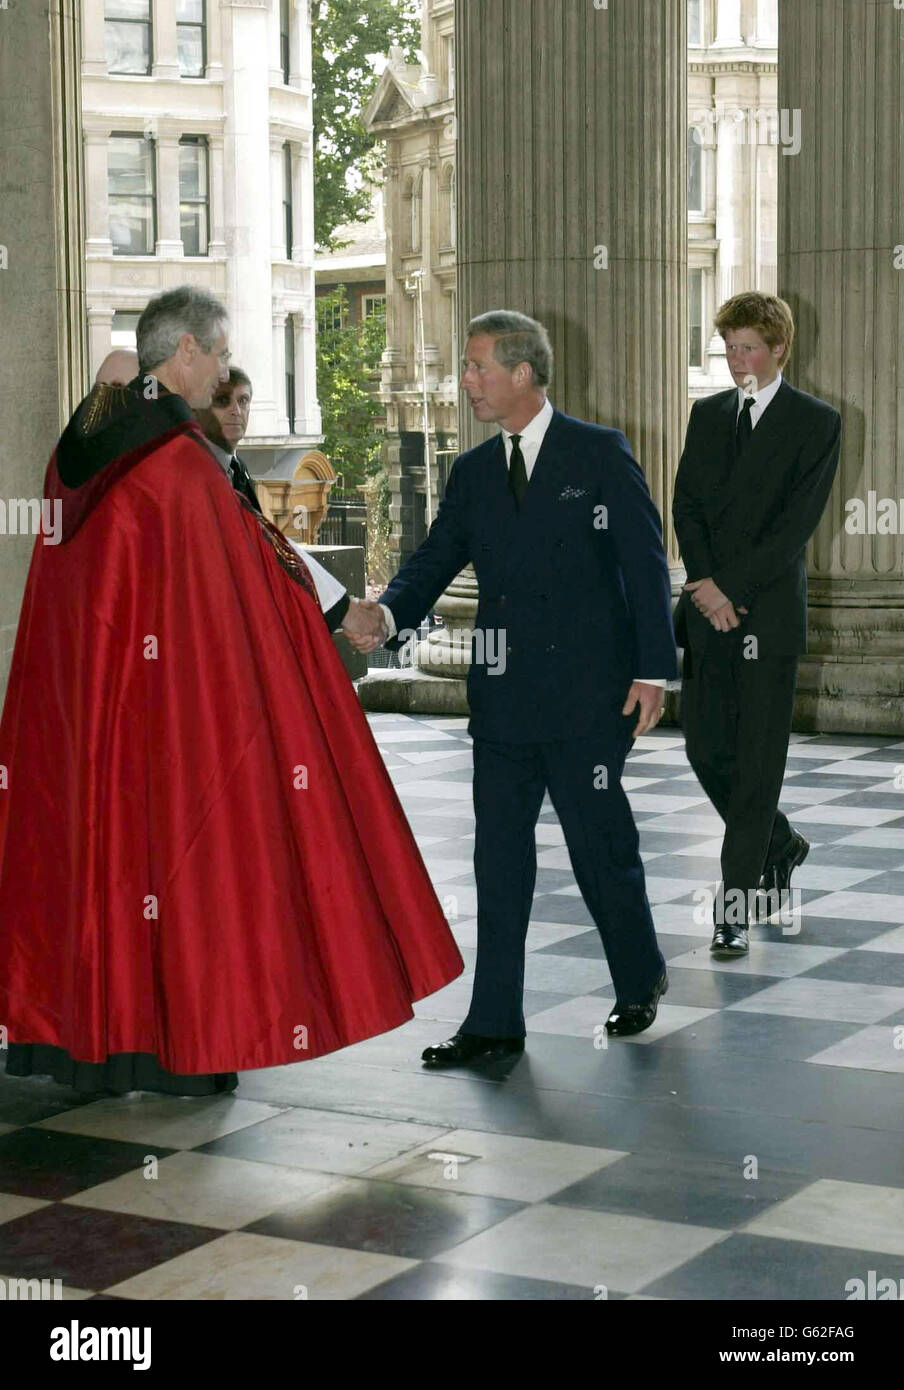 The Prince of Wales and Prince Harry arrive at the September 11th service at St Paul's Cathedral in London. * where they will attend the service of Remembrance and Commemoration for those who died a year ago in terrorist attacks on New York, Washington and Pennsylvania. During the service, 3,000 white rose petals representing those who died that day are being released from the cathedral's Whispering Gallery. Afterwards, the Prince Charles and Prince Harry are to meet relatives of the 67 British victims. Stock Photo